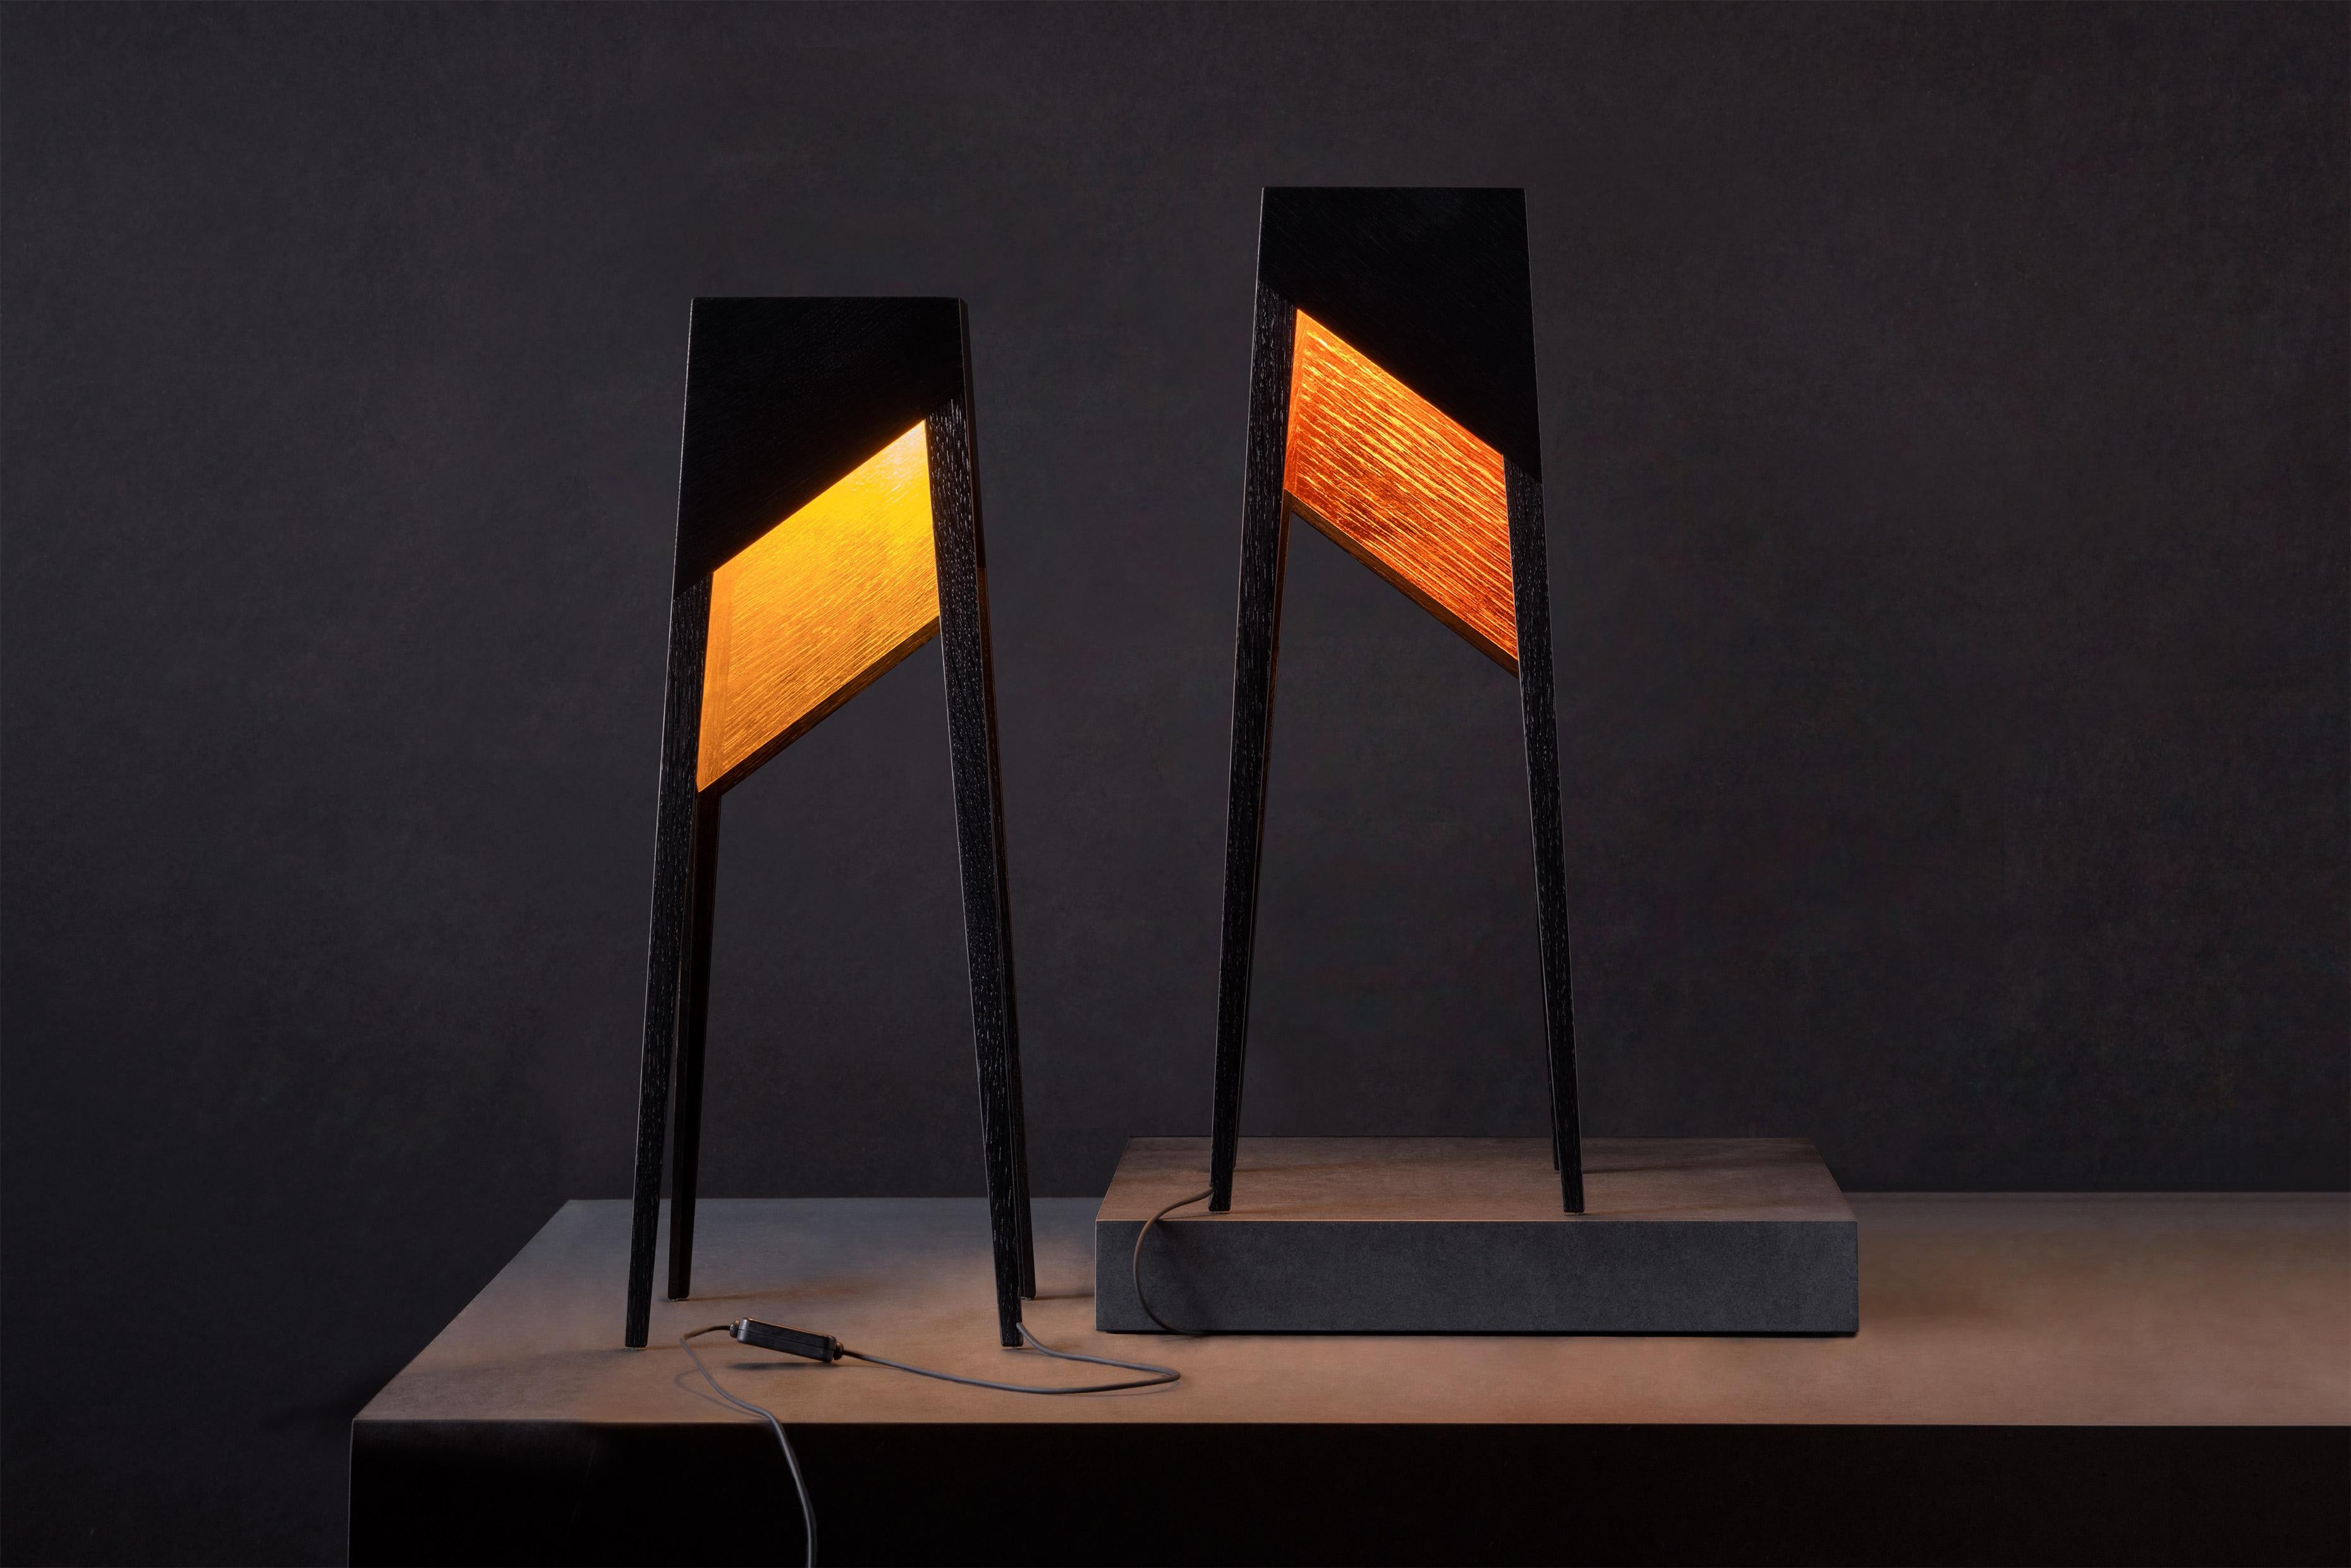 Set of 2 Luise Ltd baby floor lamp by Matthias Scherzinger.
Limited Edition of 2.
Dimensions: H 46.5 x 18 cm.
Materials: solid wood - oak black stained hard wax.
 Inside surface: copper leaf, gold leaf.

All our lamps can be wired according to